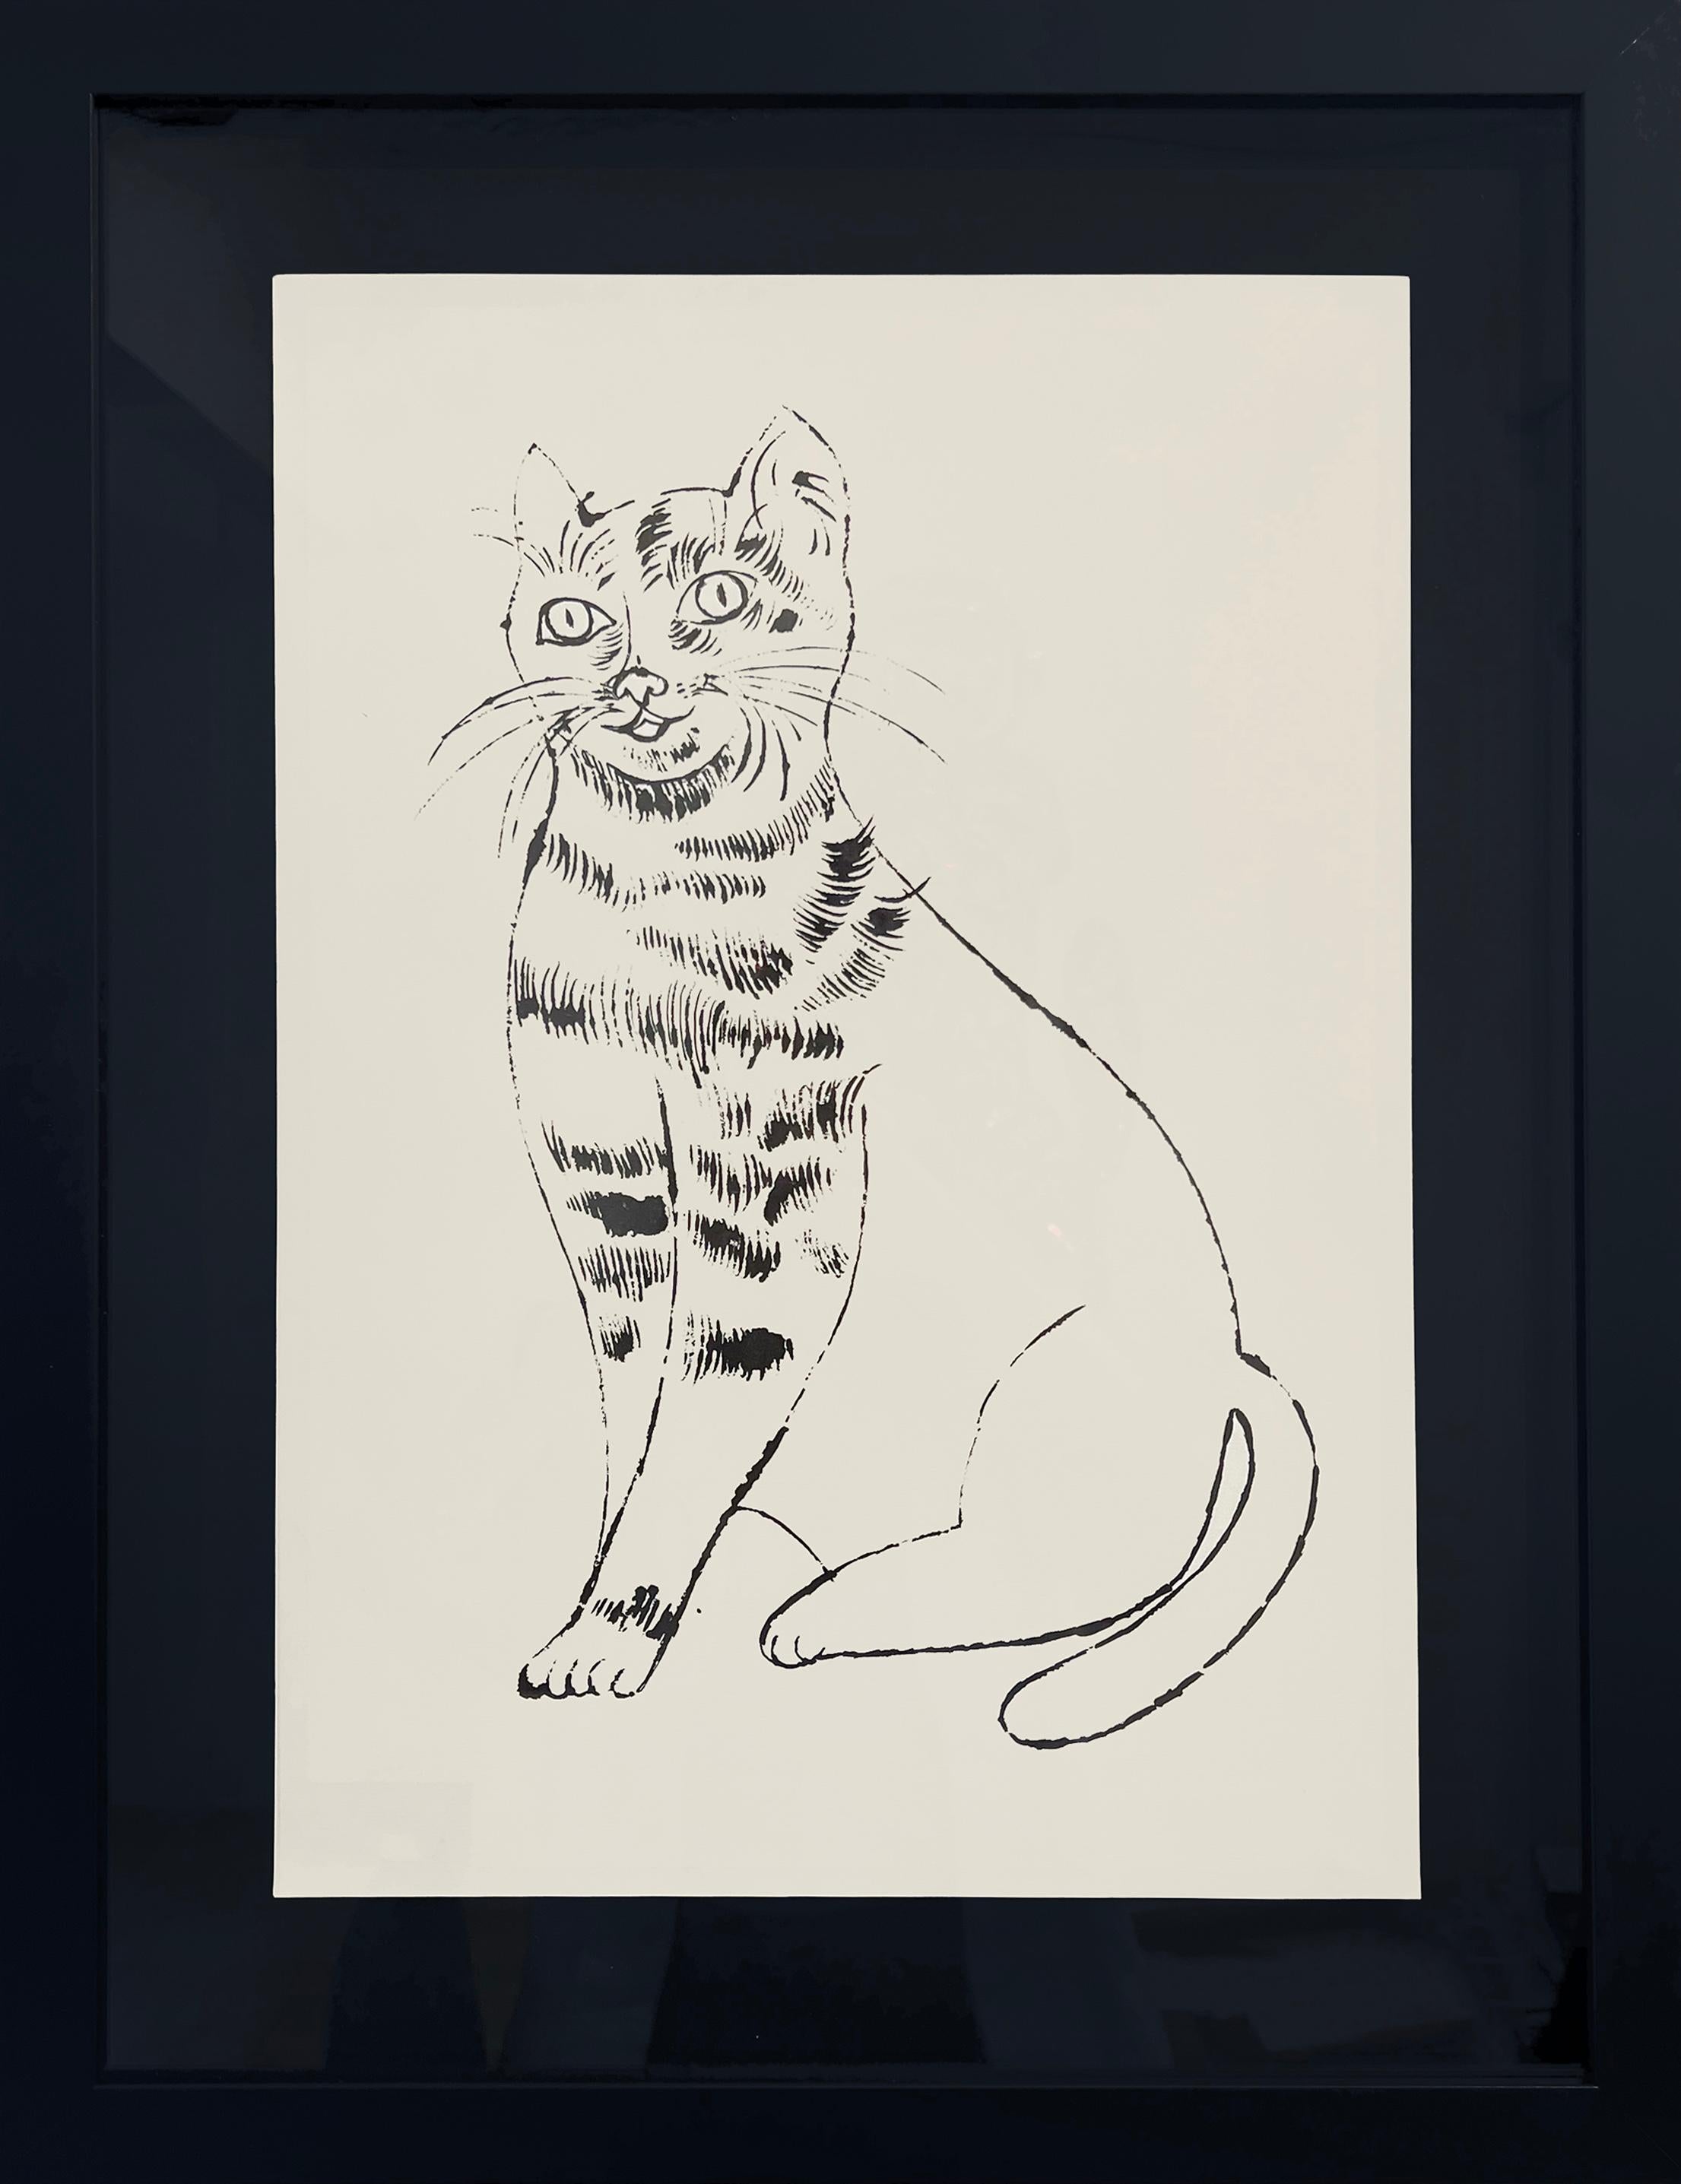 25 Cats Named Sam and One Blue Pussy - Print by Andy Warhol